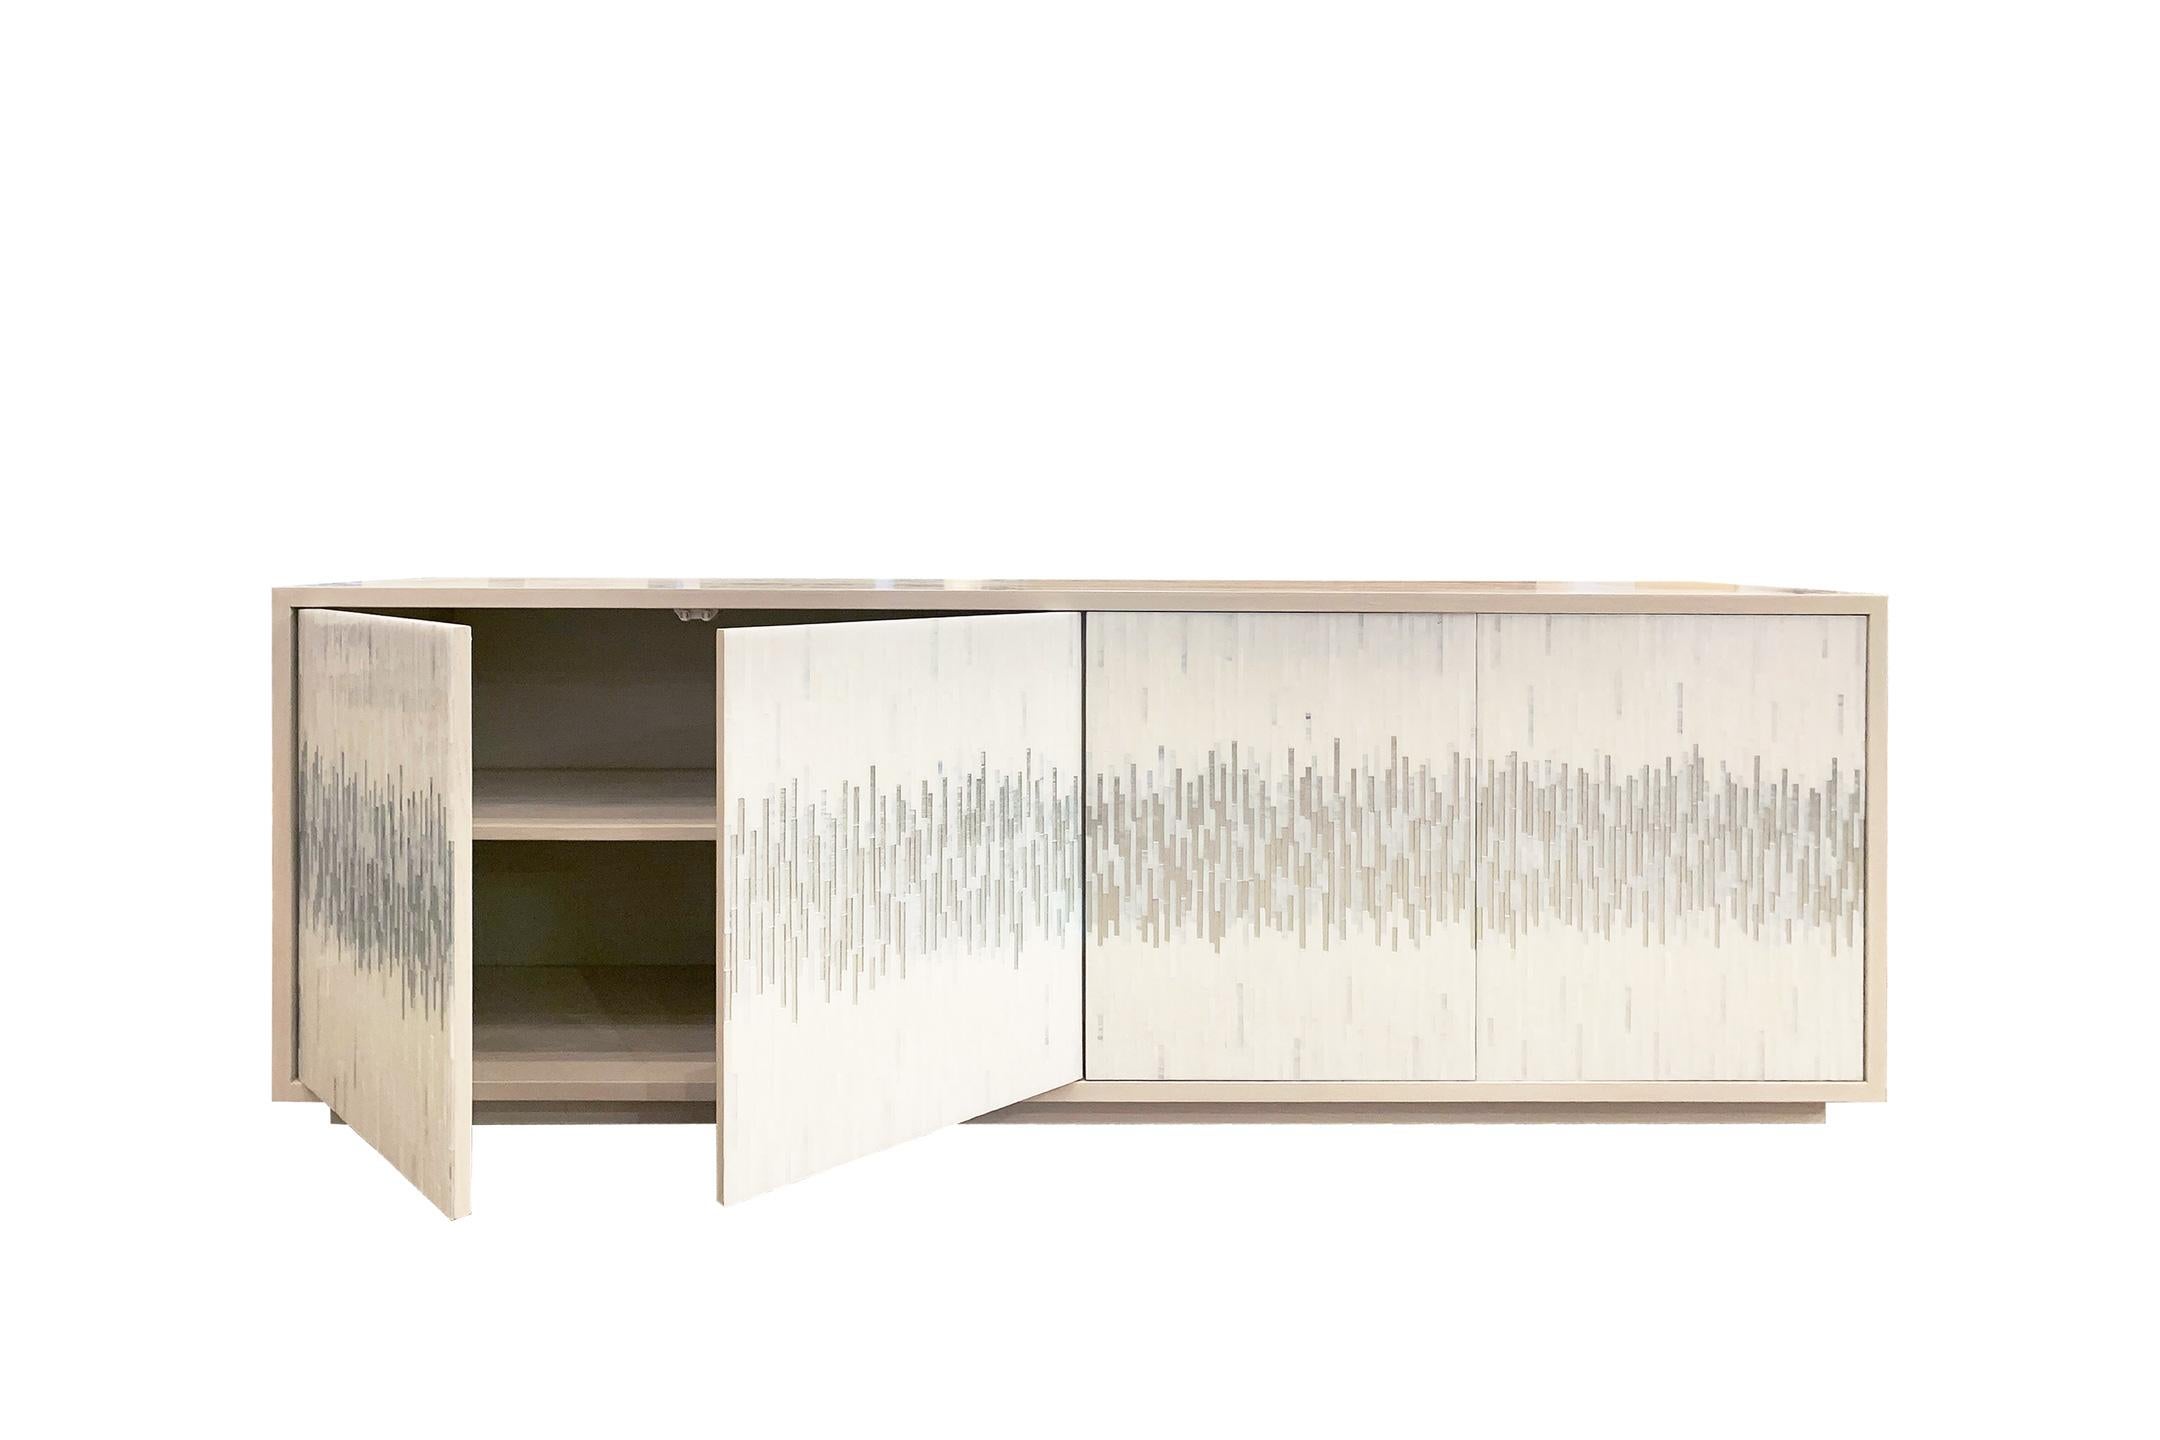 The platform wave buffet by Ercole Home has a 4-door front, with washed ivory wood finish on oak. Handcut glass mosaics in icy white and silver, wispy white silver decorate the surface in a continuous wave pattern.
There is one adjustable interior